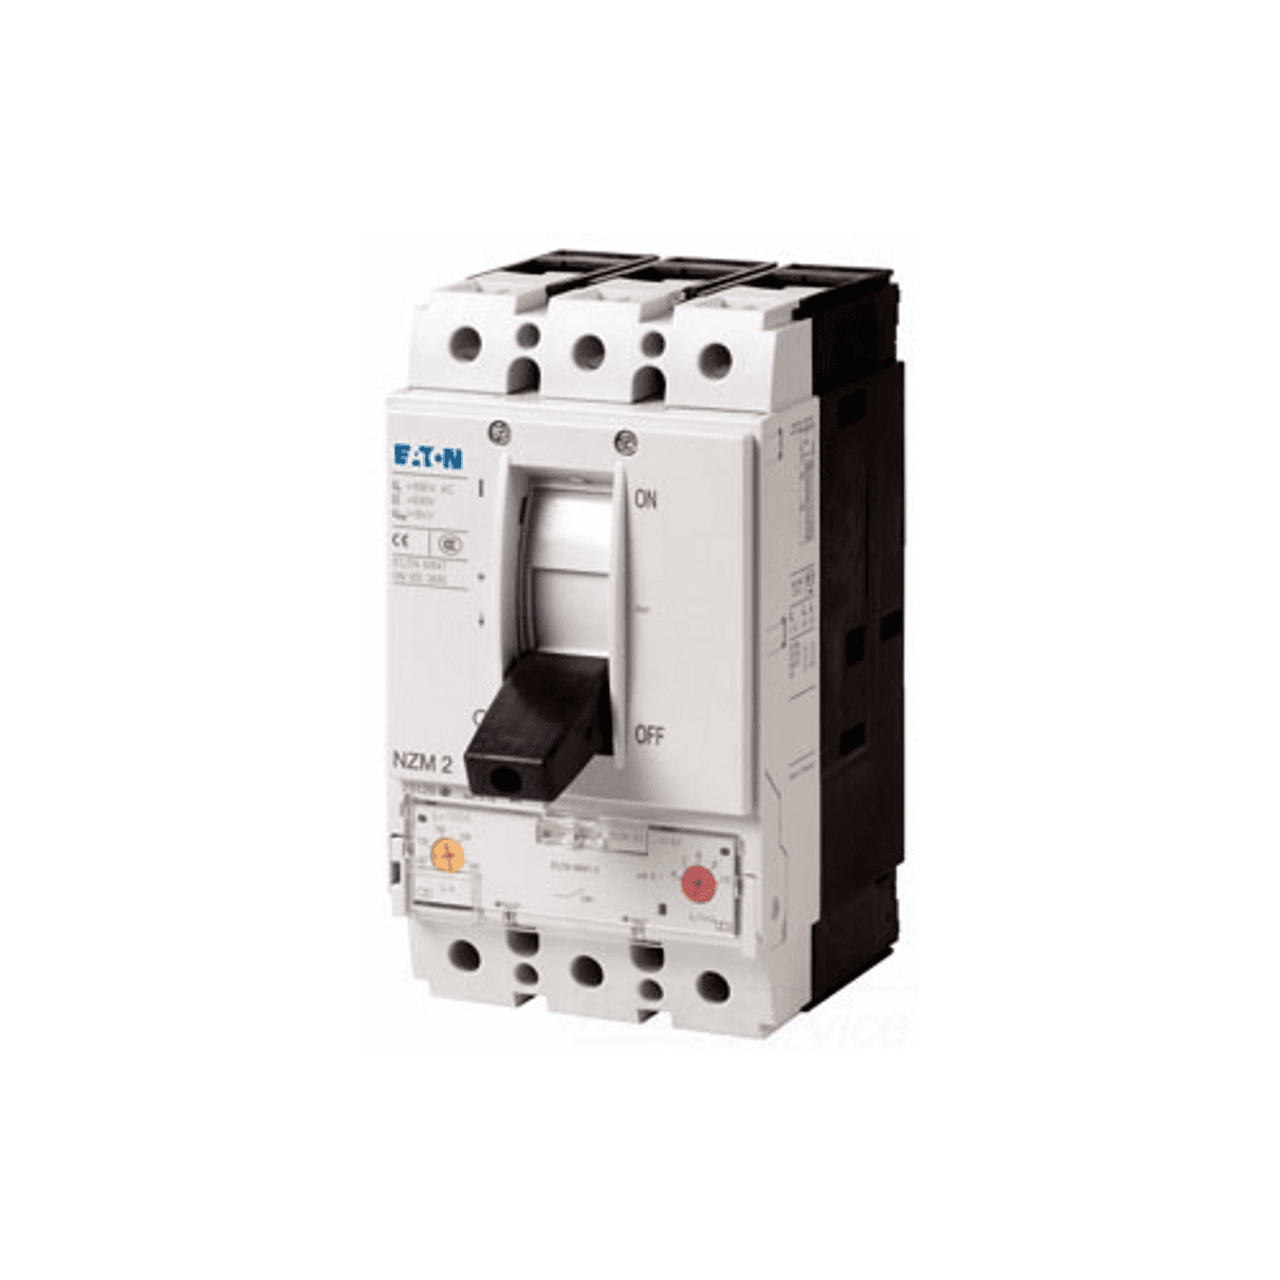 Eaton NZMN2-AF60-NA 600 VAC Star/347 VAC, 480 V, 60 A, 50 kA, 3-Pole, Front Screw Terminal, NZM2 Frame, Fixed Thermal Magnetic, Molded Case Circuit Breaker